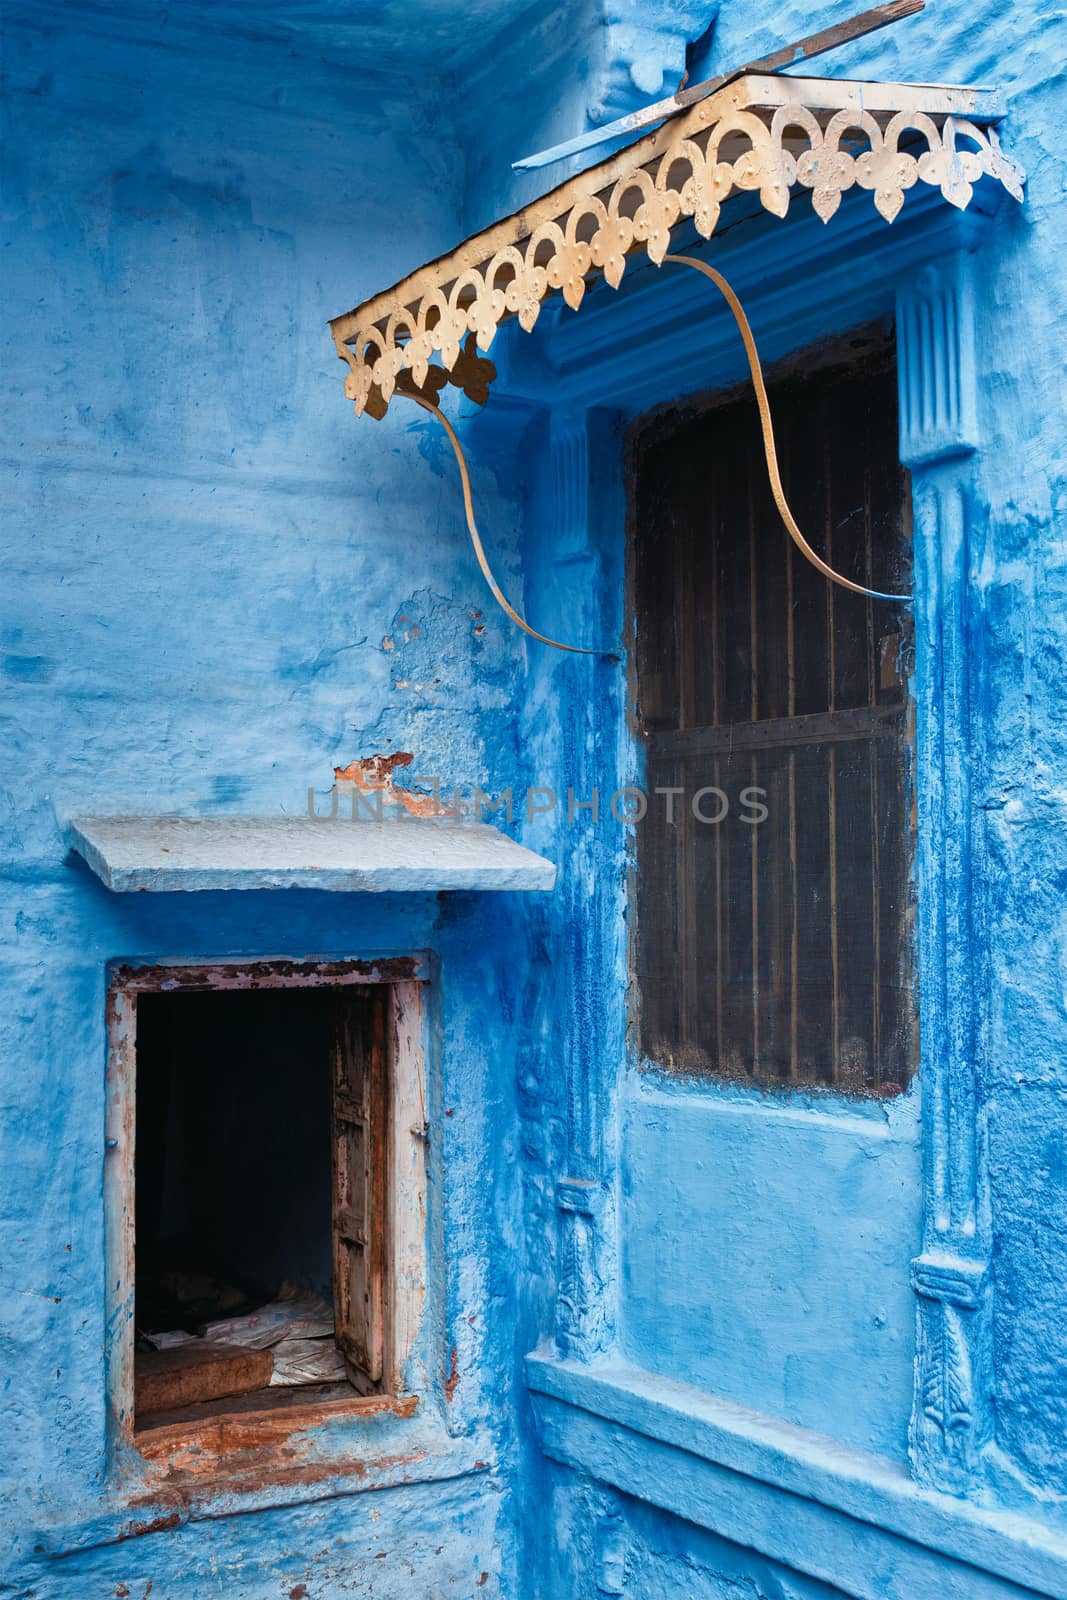 Windows in blue house facade in streets of of Jodhpur, also known as Blue City due to the vivid blue-painted Brahmin houses, Jodhpur, Rajasthan, India